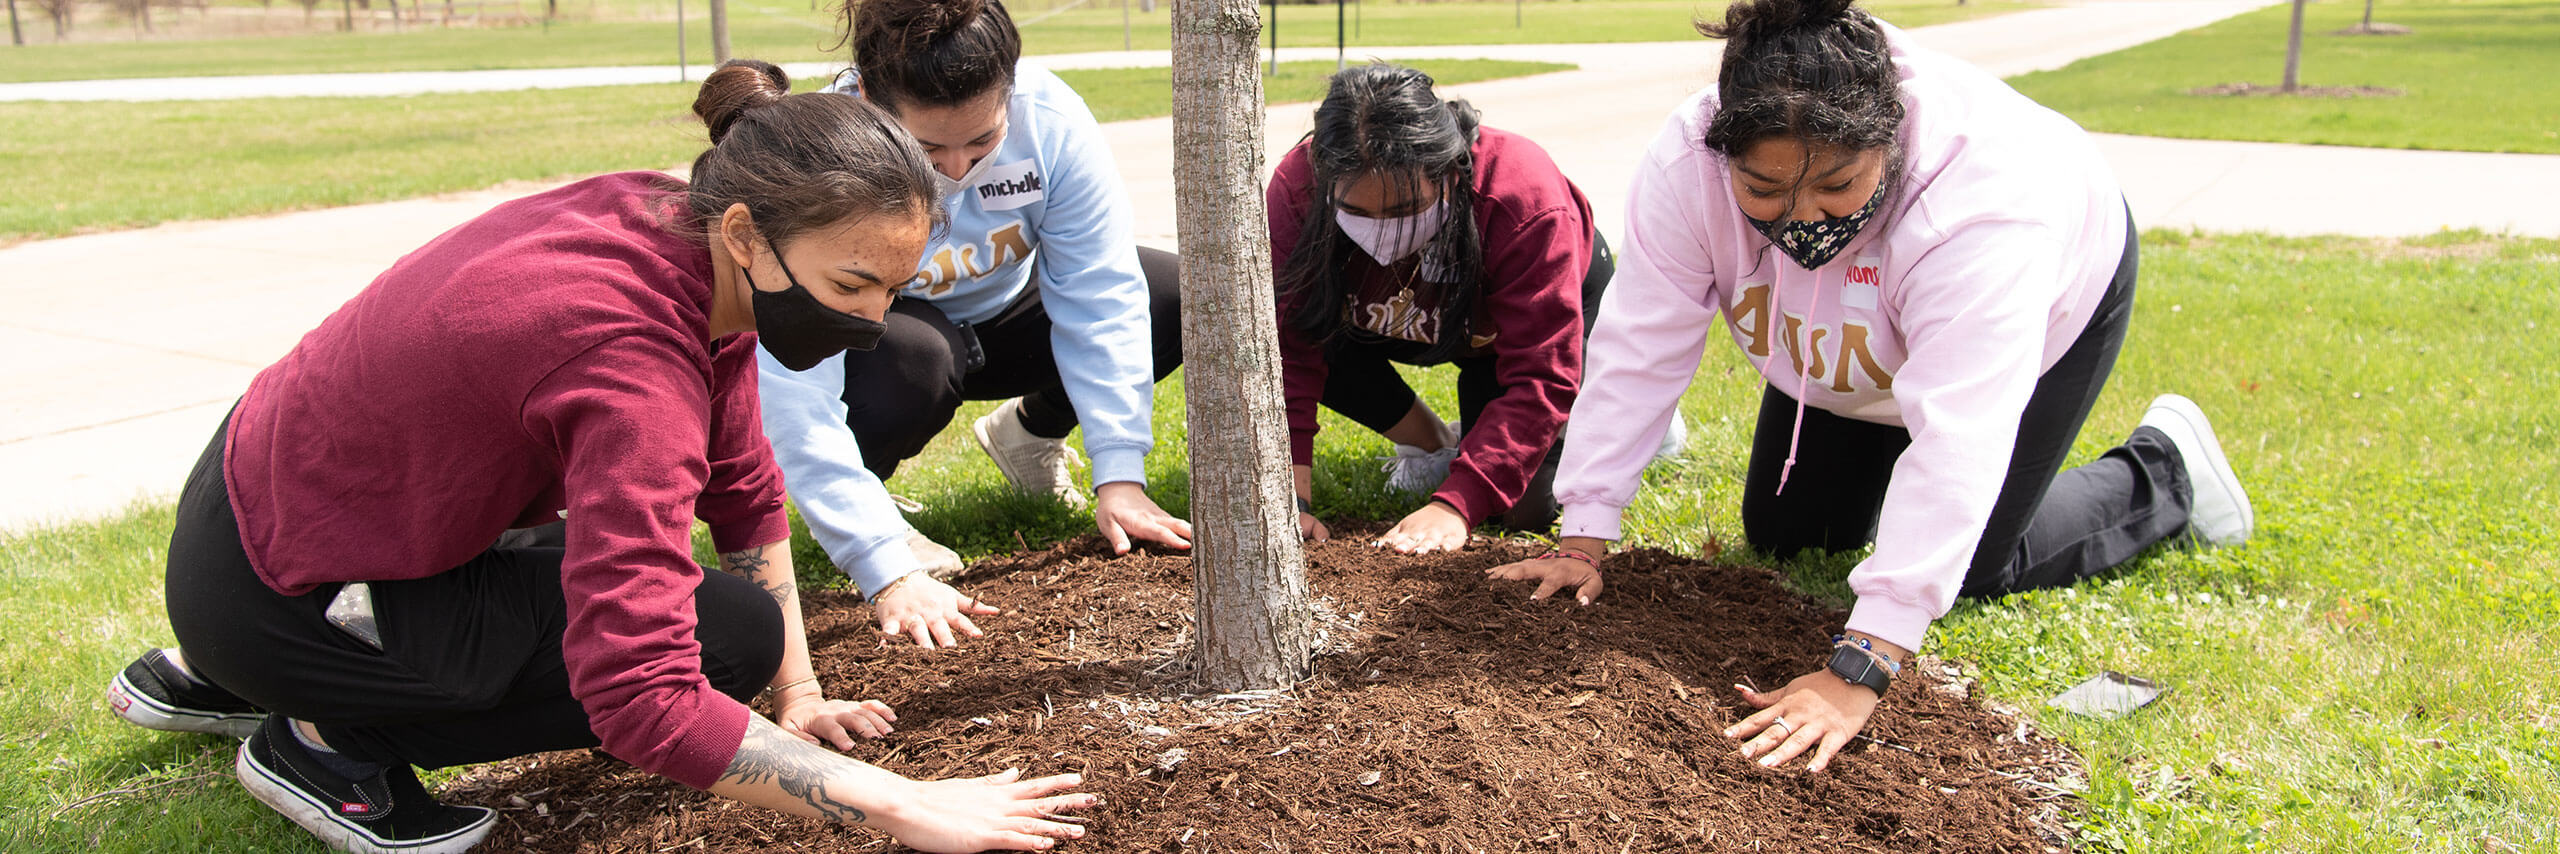 Students working on a garden.